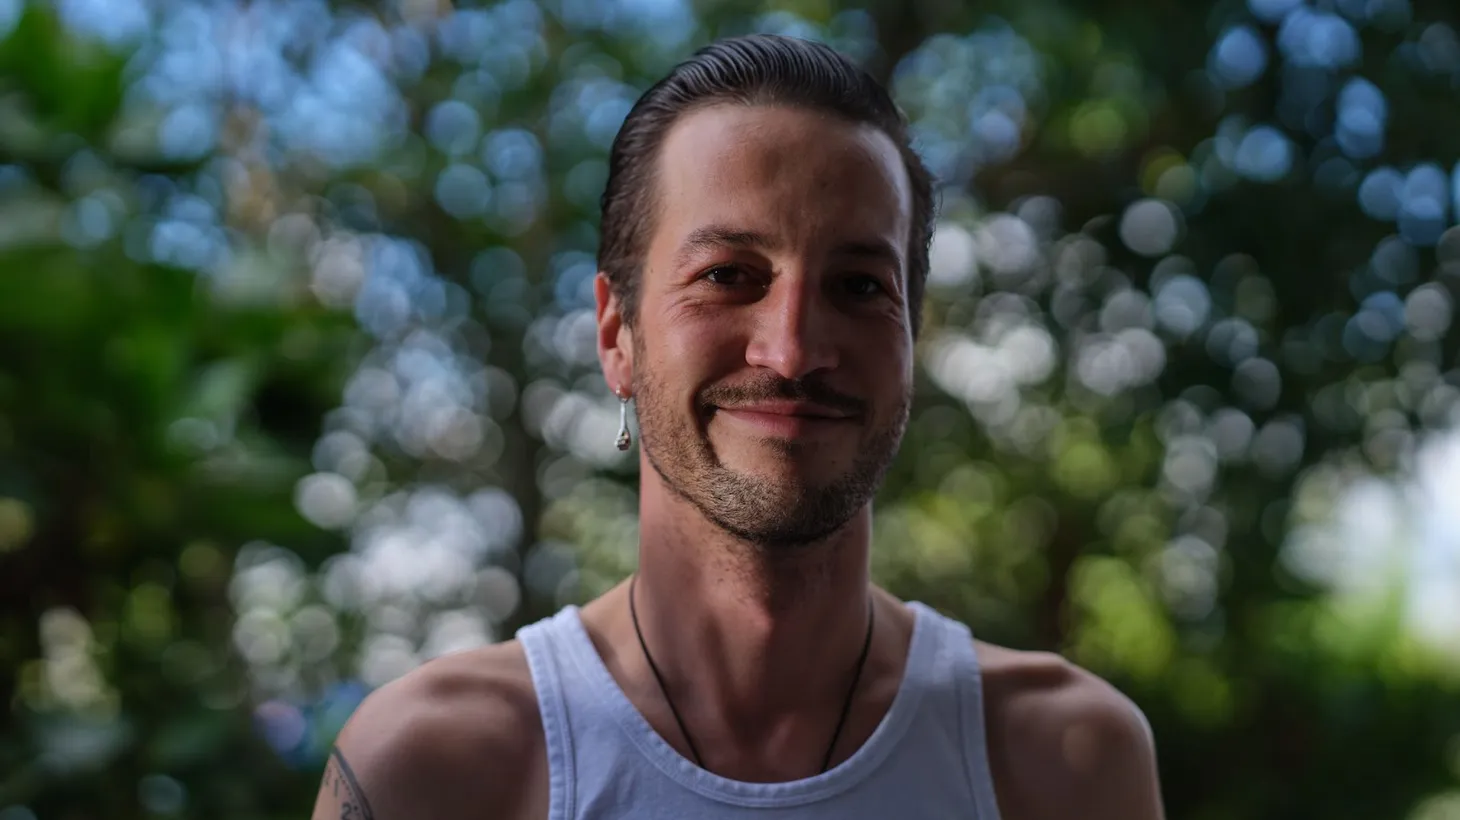 Hailing from New Zealand, singer Marlon Williams infuses his pop-inflected song “My Boy” with Maori strums and a new backing band.